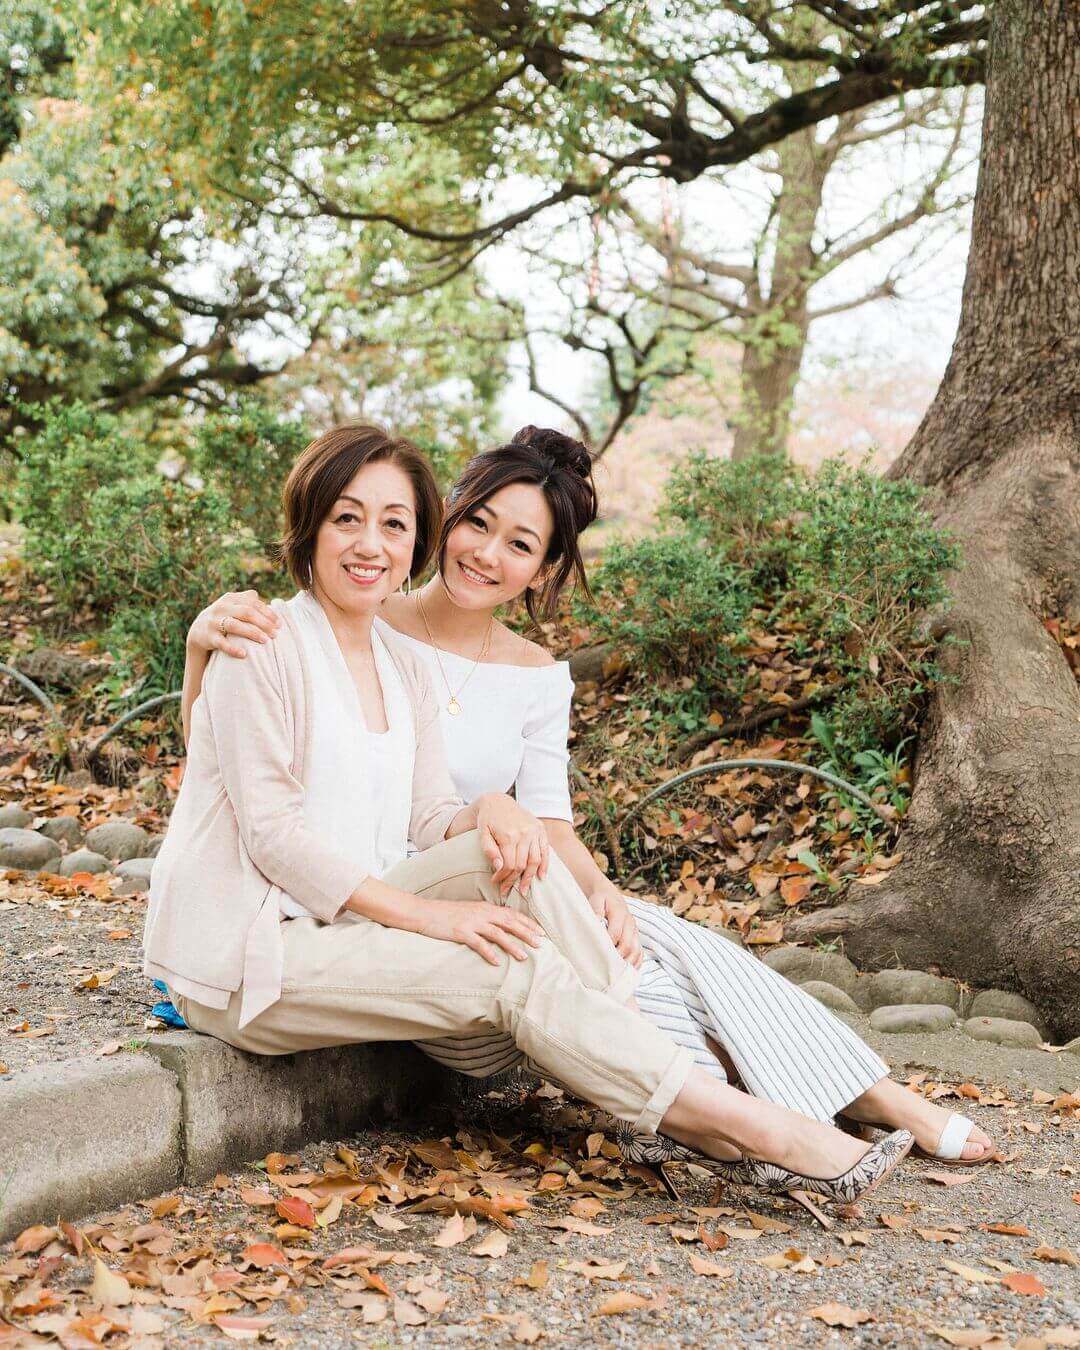 Karen Fukuhara and her mother in a park